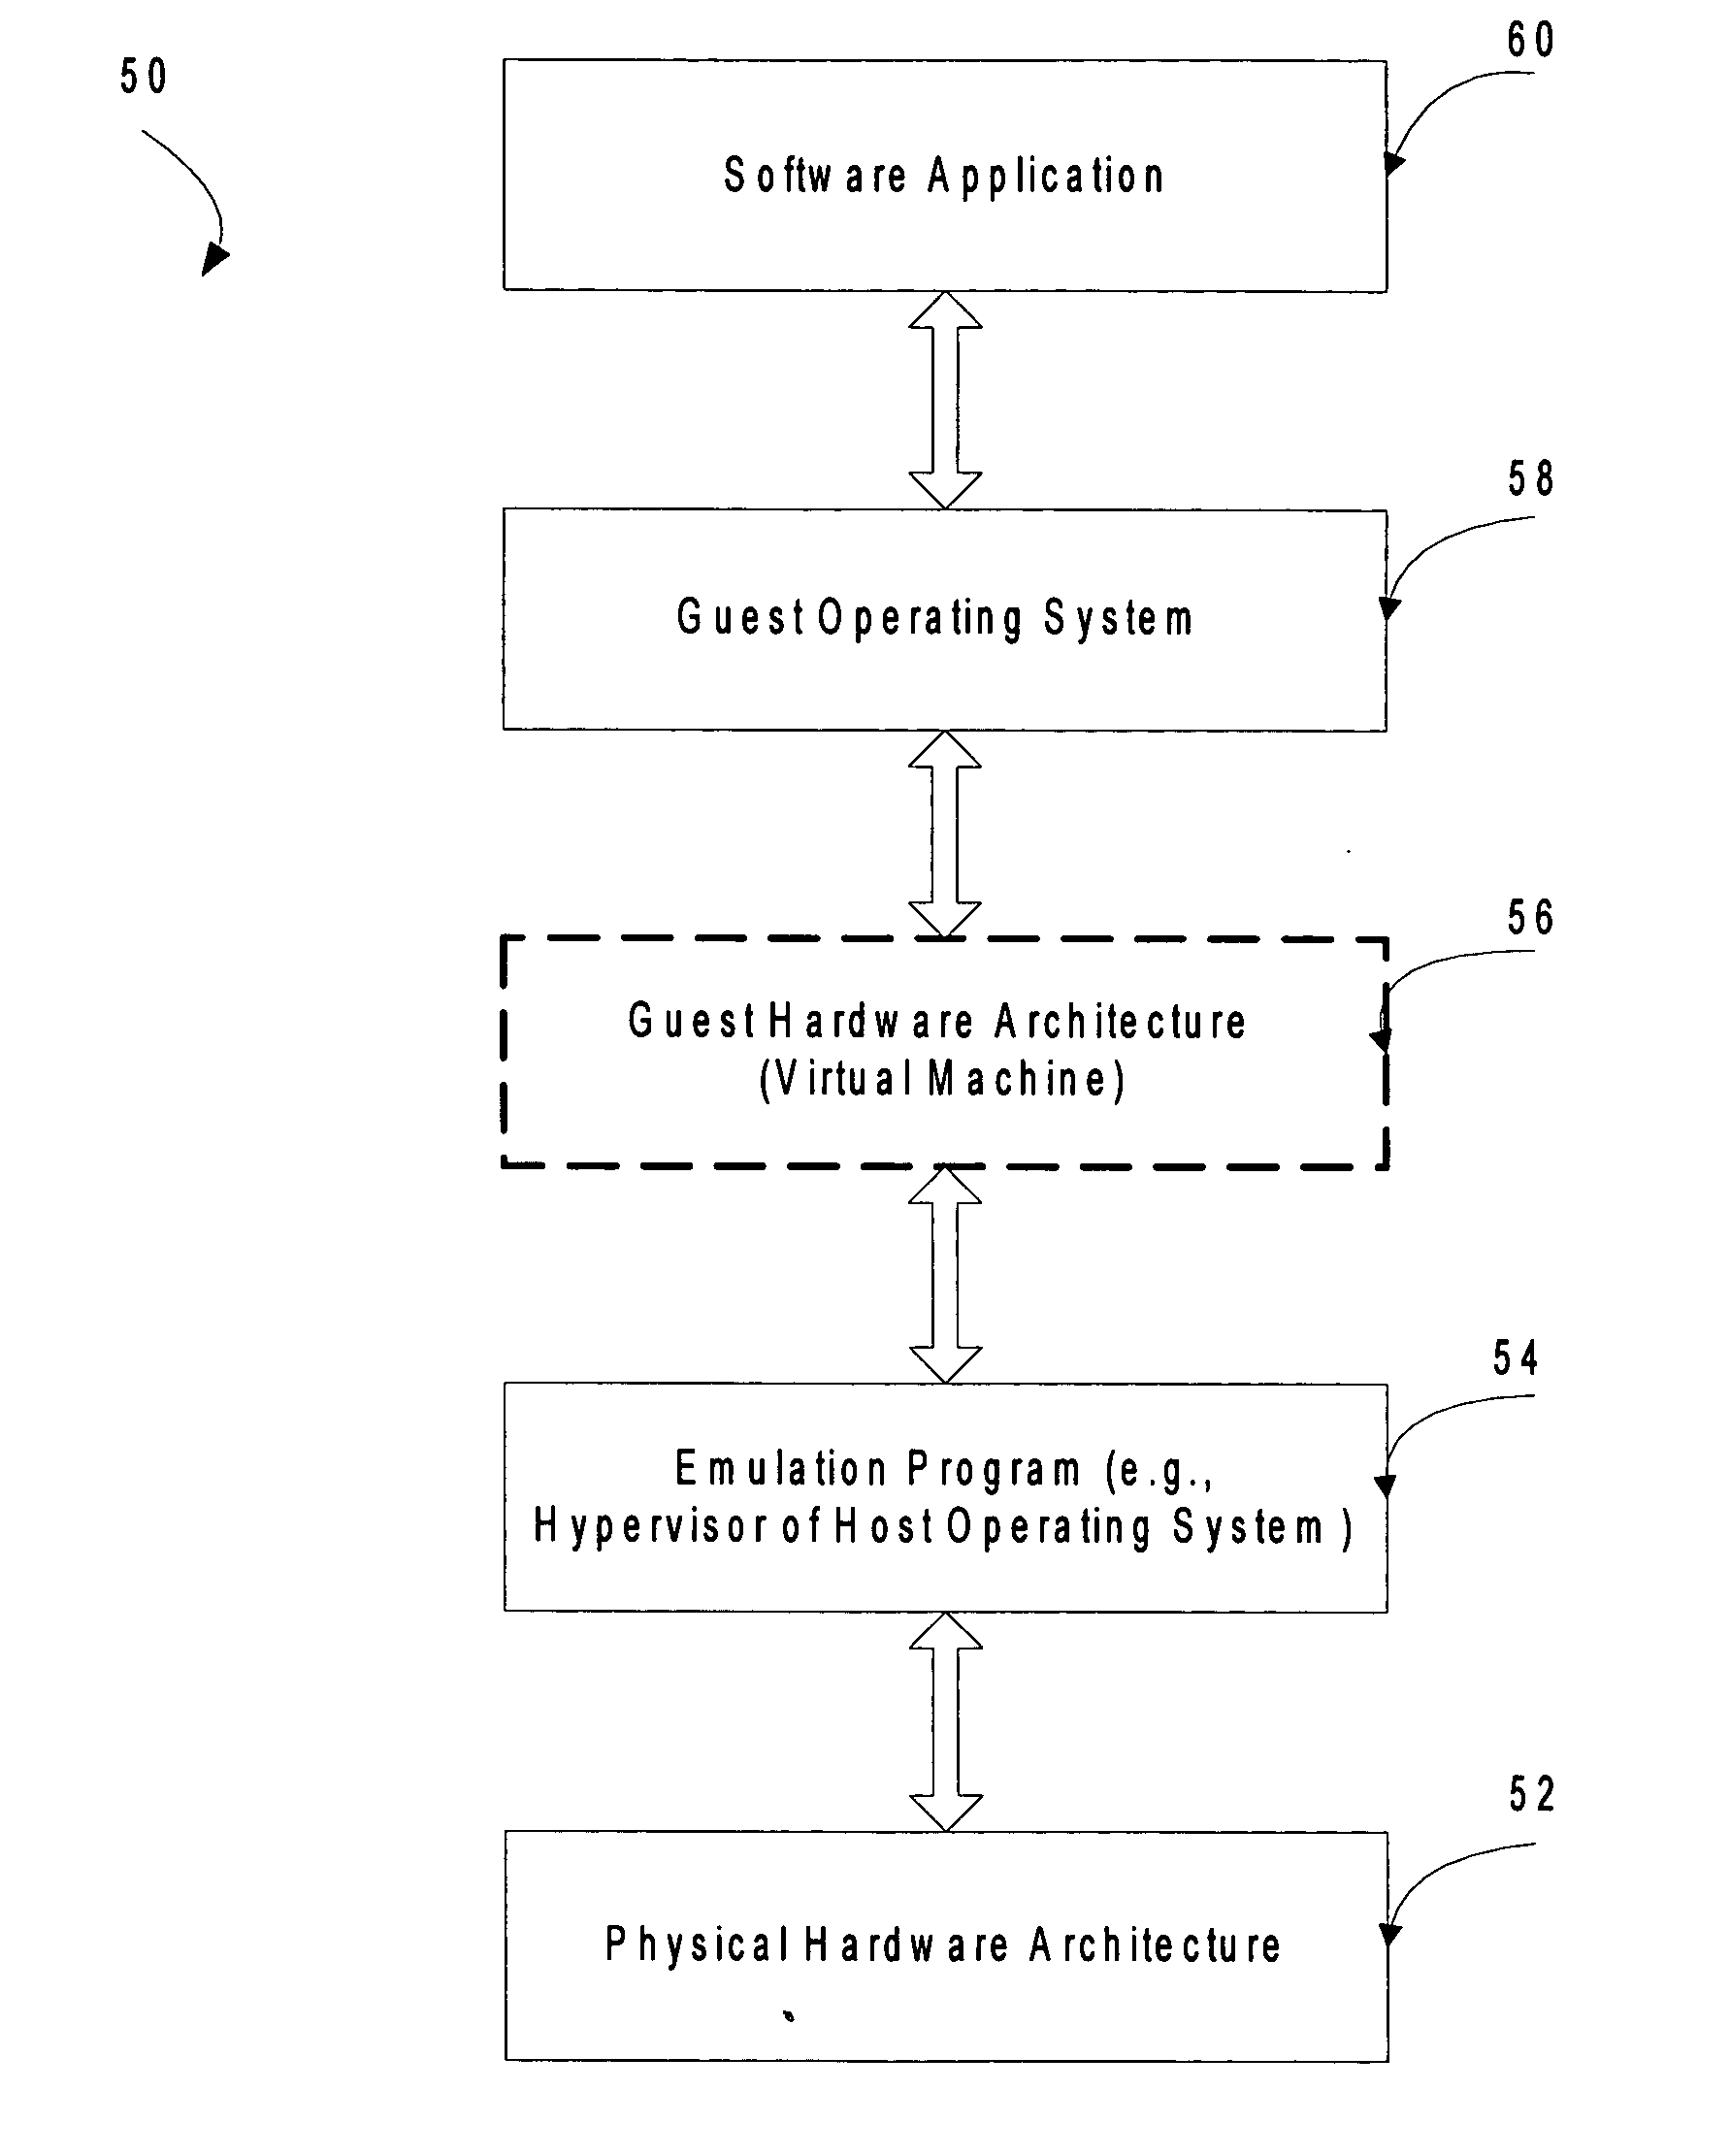 Virtual operating system device communication relying on memory access violations